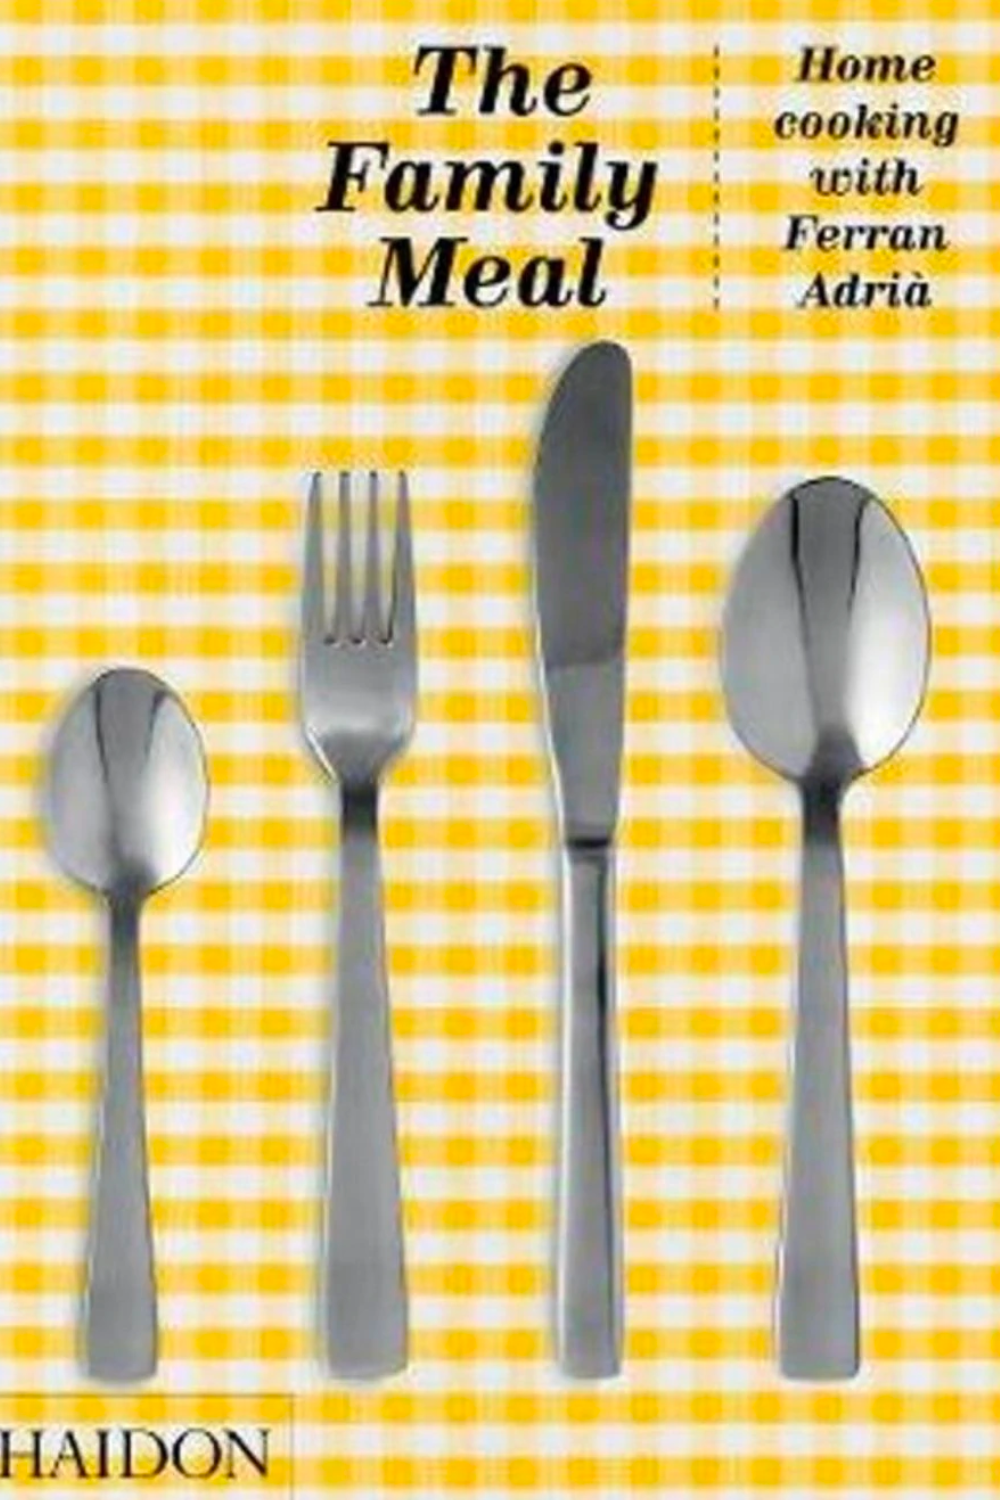 THE FAMILY MEAL - Home cooking with Ferran Adria